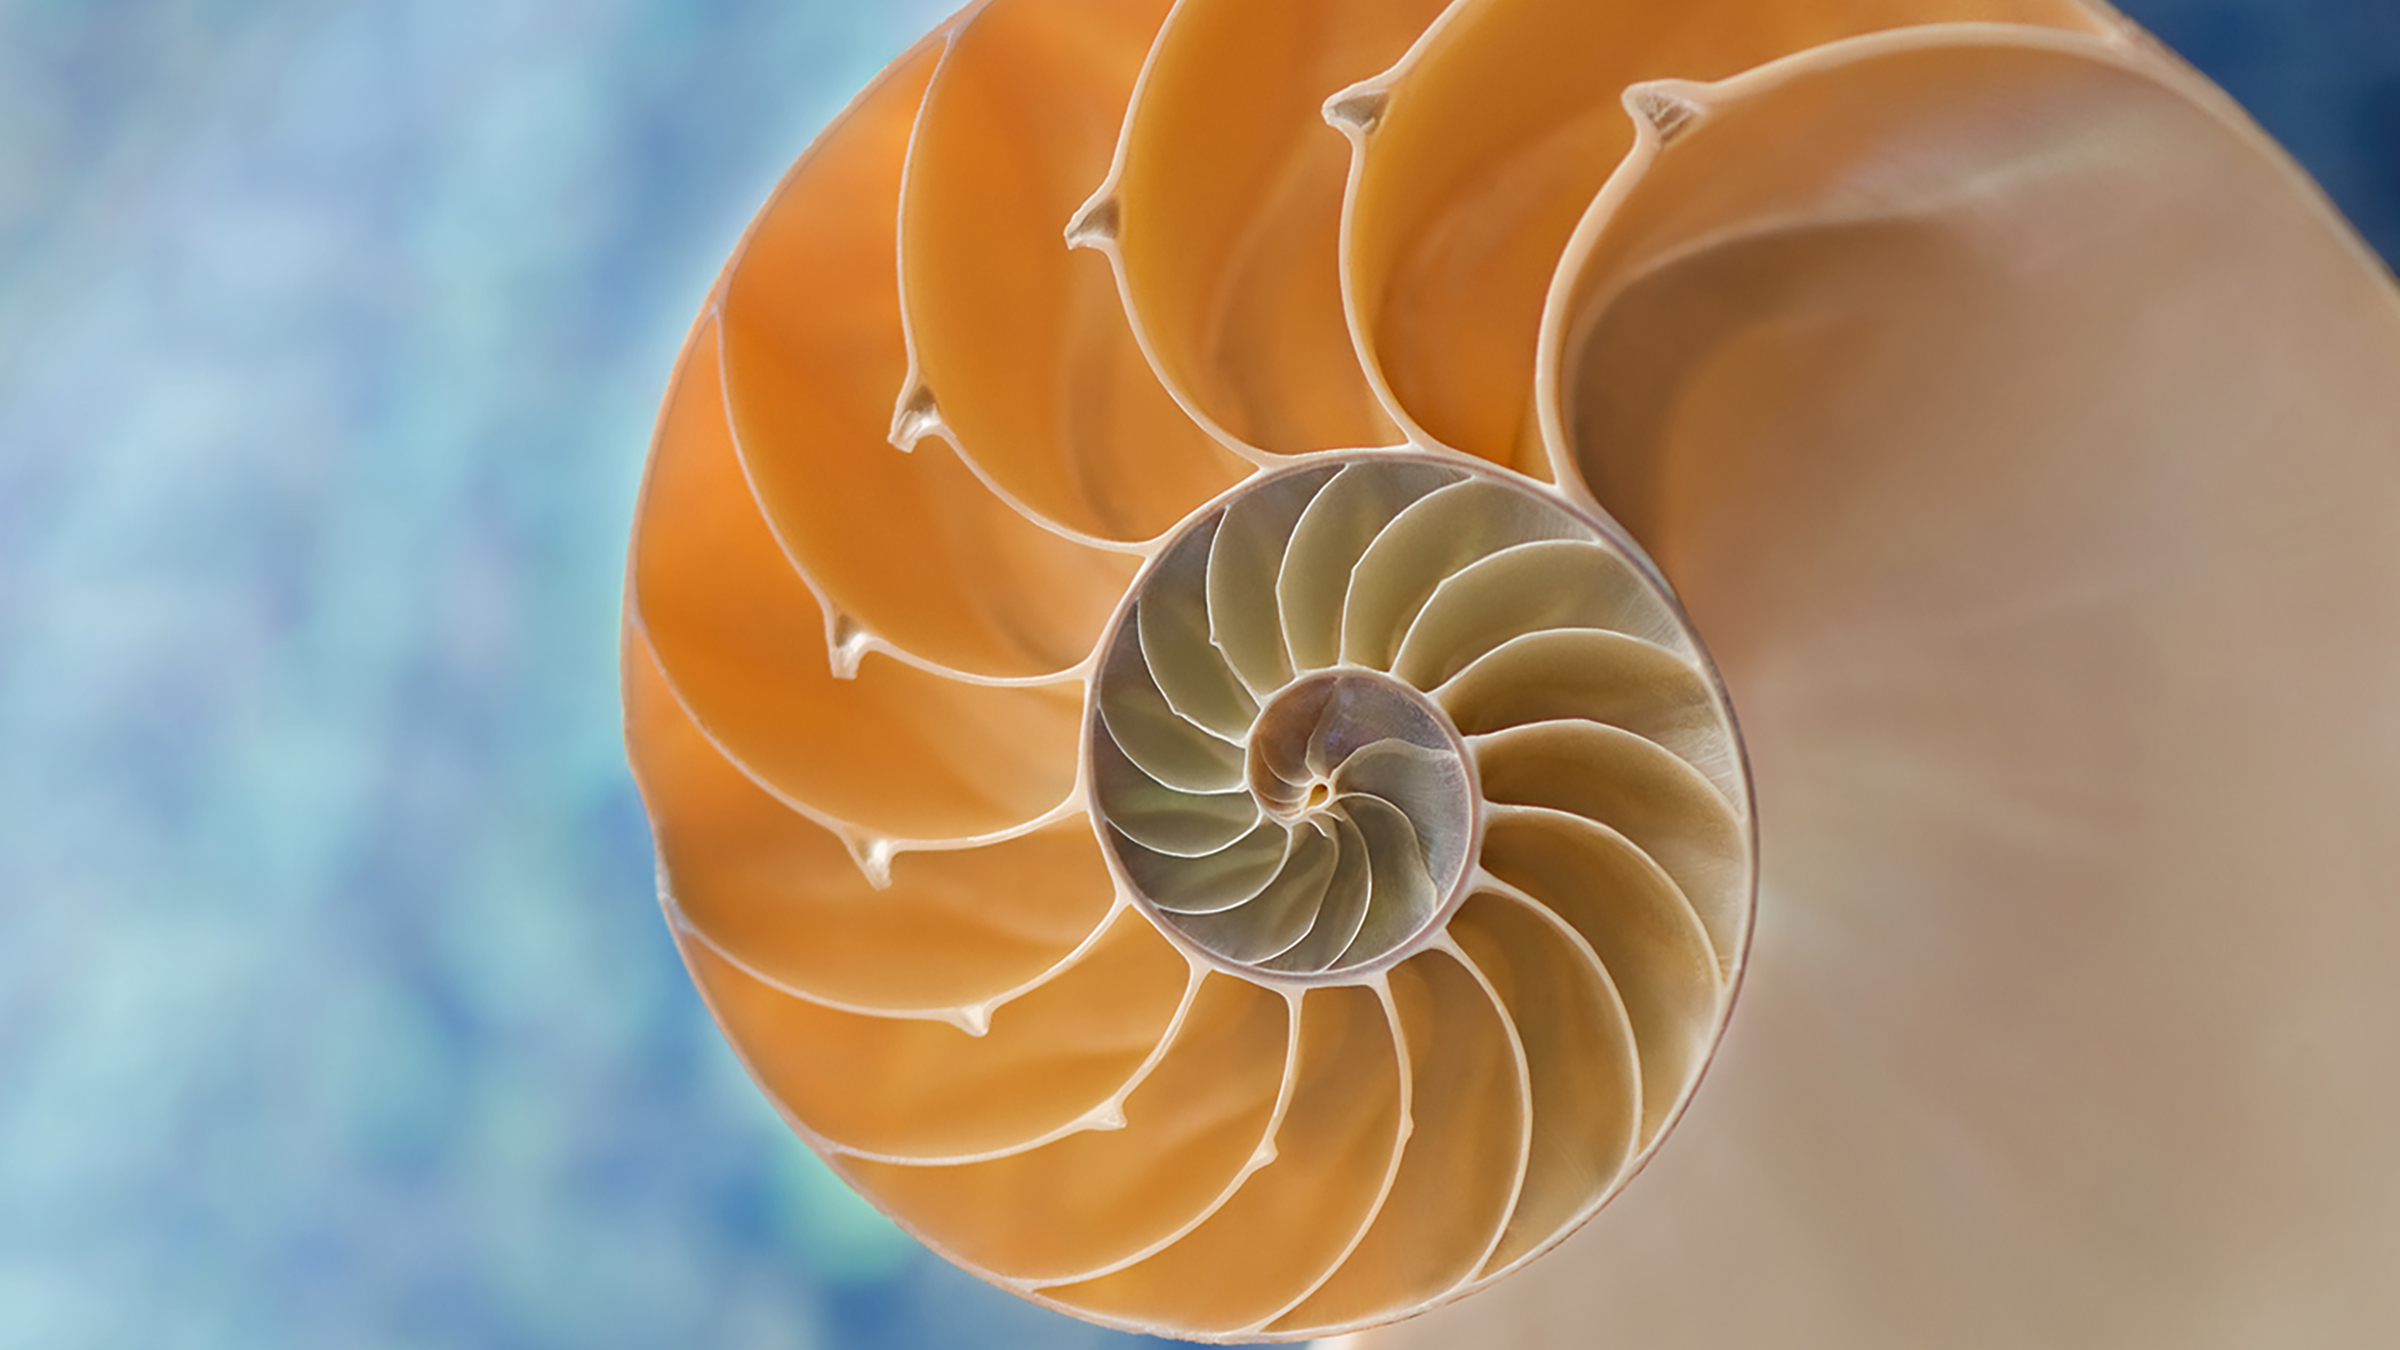 A cross-section of a nautilus shell